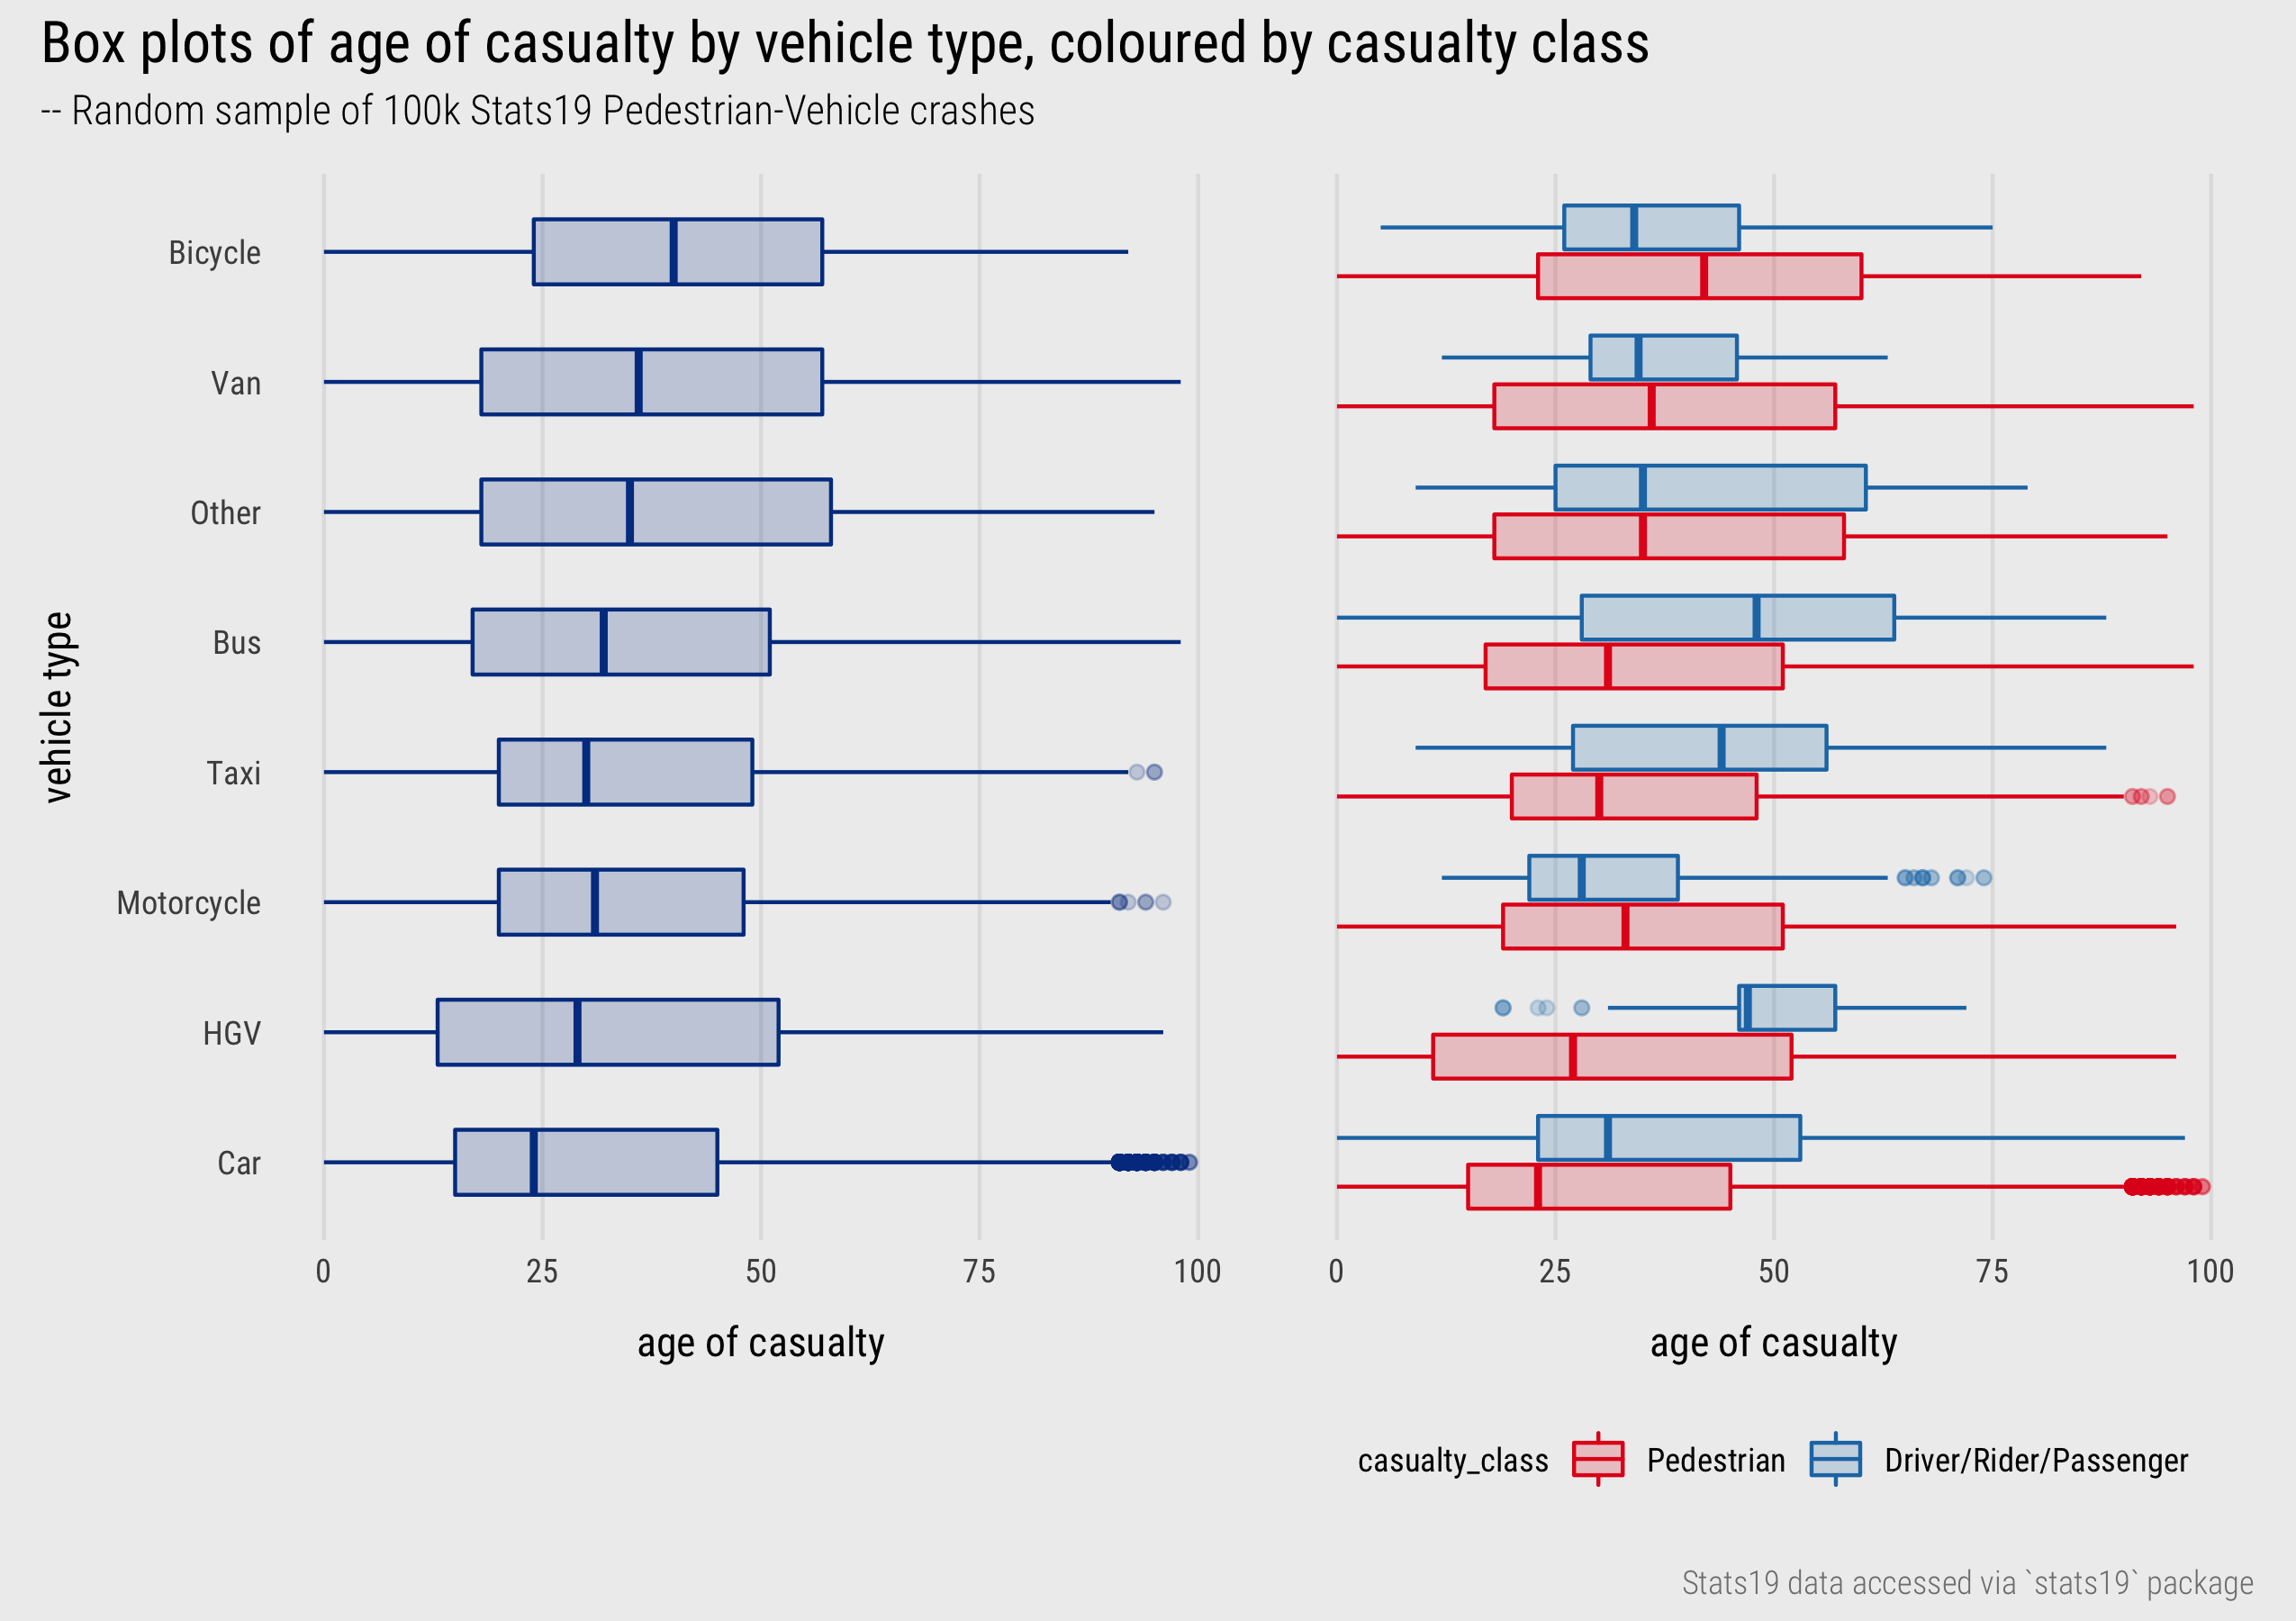 Boxplots of casualty age by vehicle type and class.